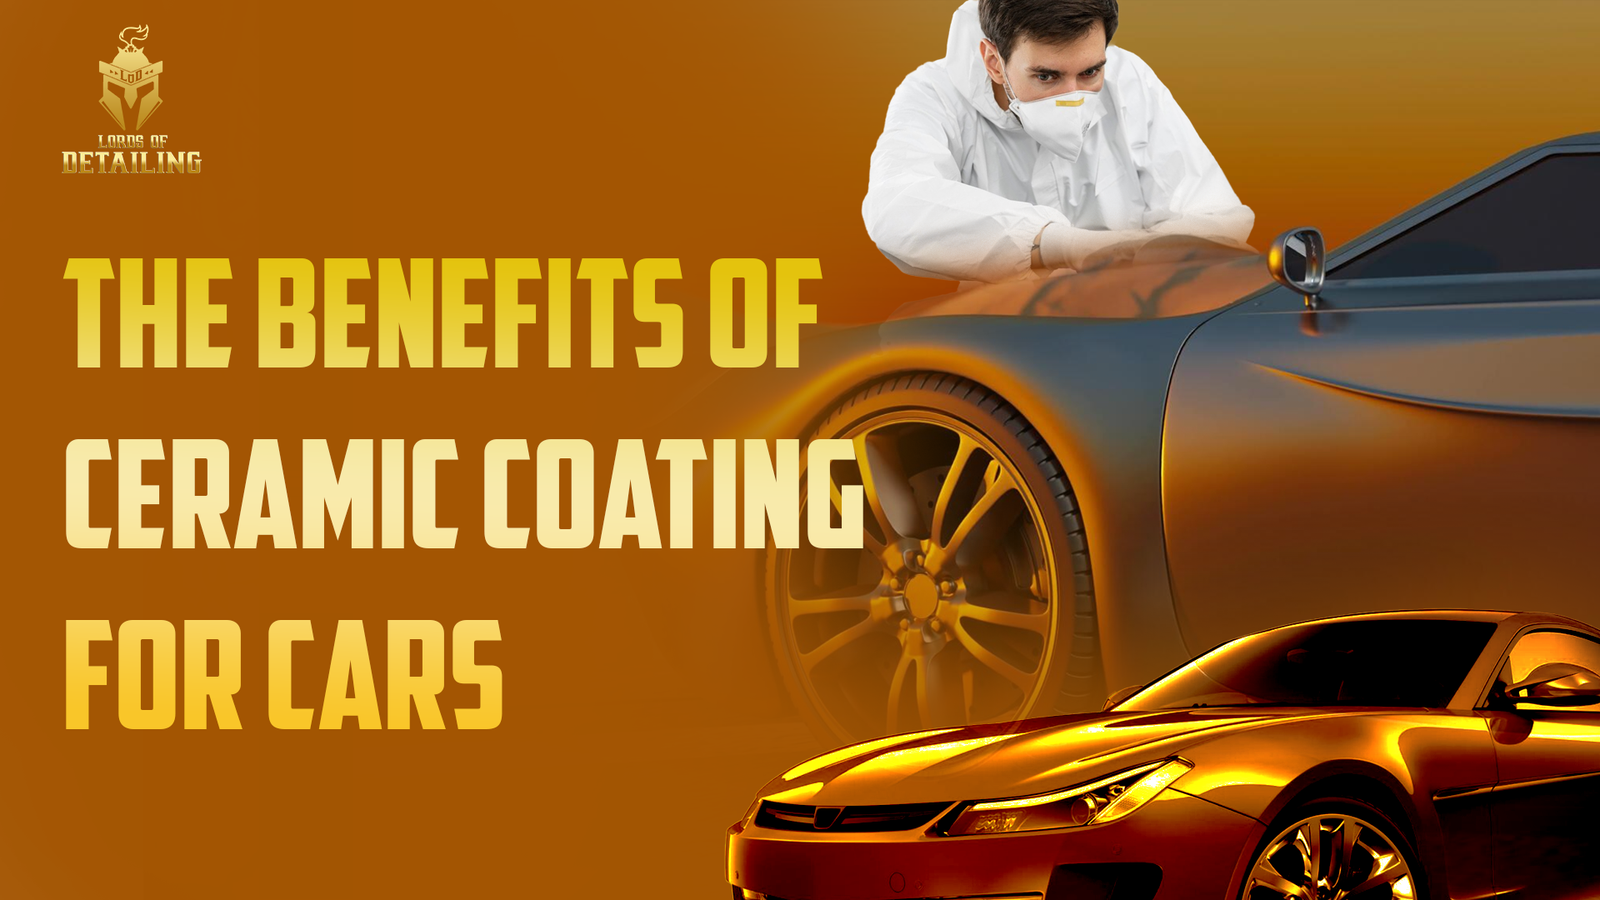 The Benefits of Ceramic Coating for Cars.